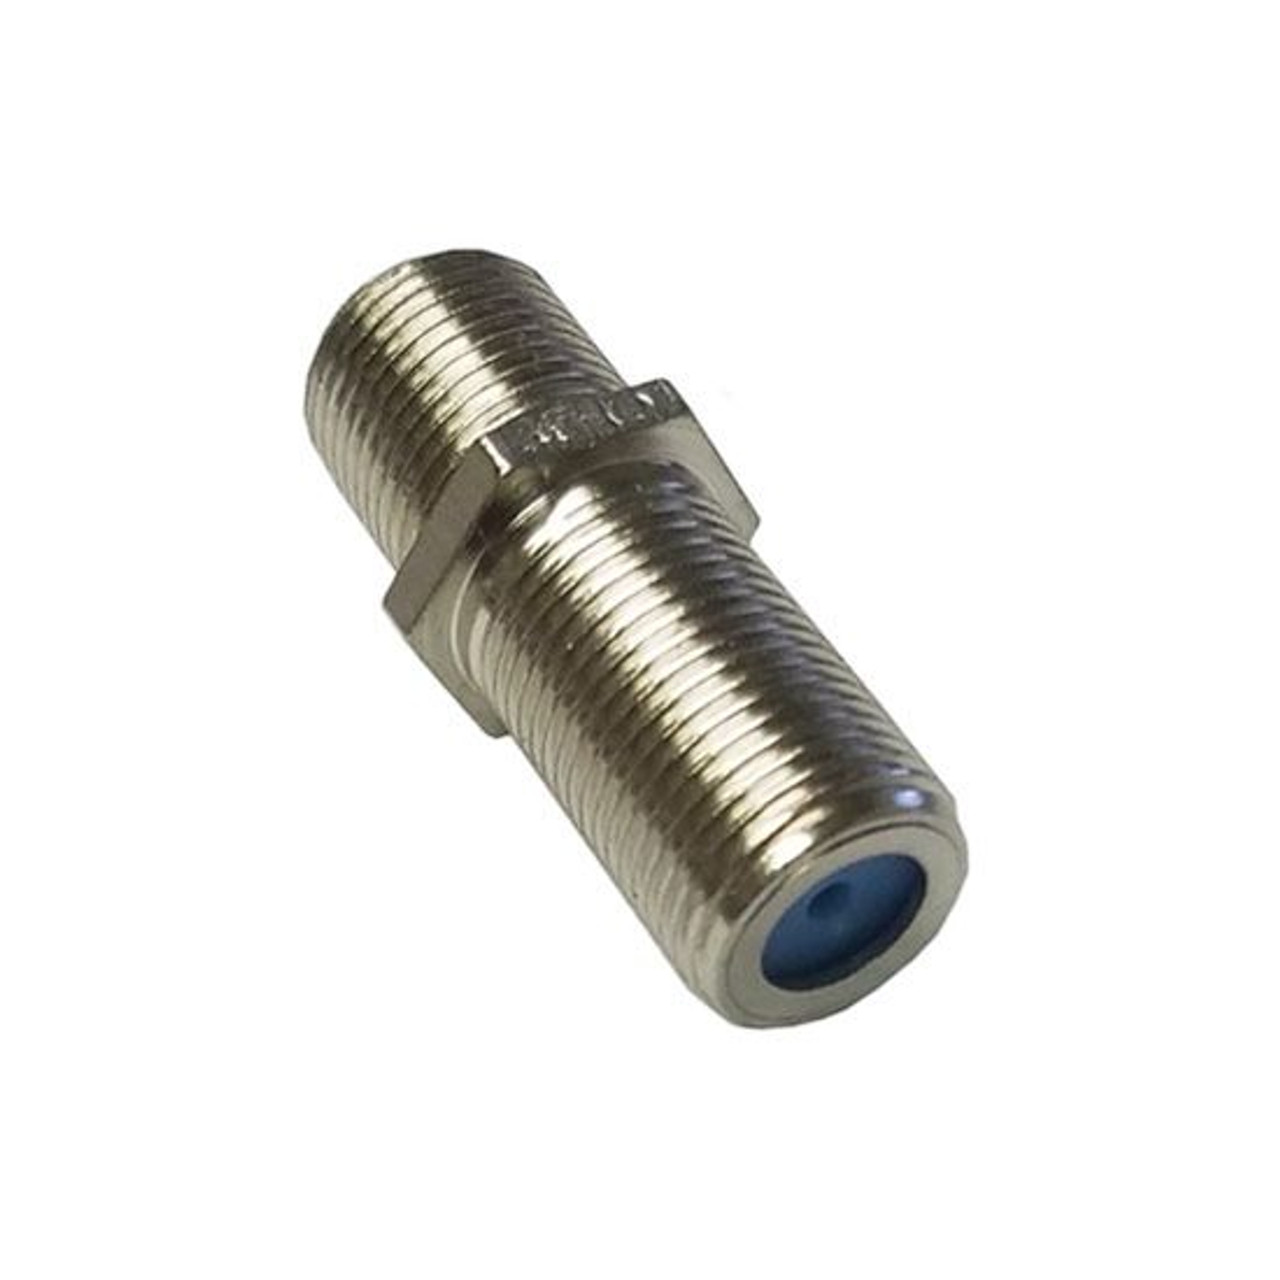 Steren 200-057 F Type Coupler 3 GHz F-81 Female to Female Jack 2.0 GHz Coaxial 1 GHz F Coupler Connector F to F Female Jack Nickle Plate Coaxial F-81 Splice Connector Barrel 1 Pack